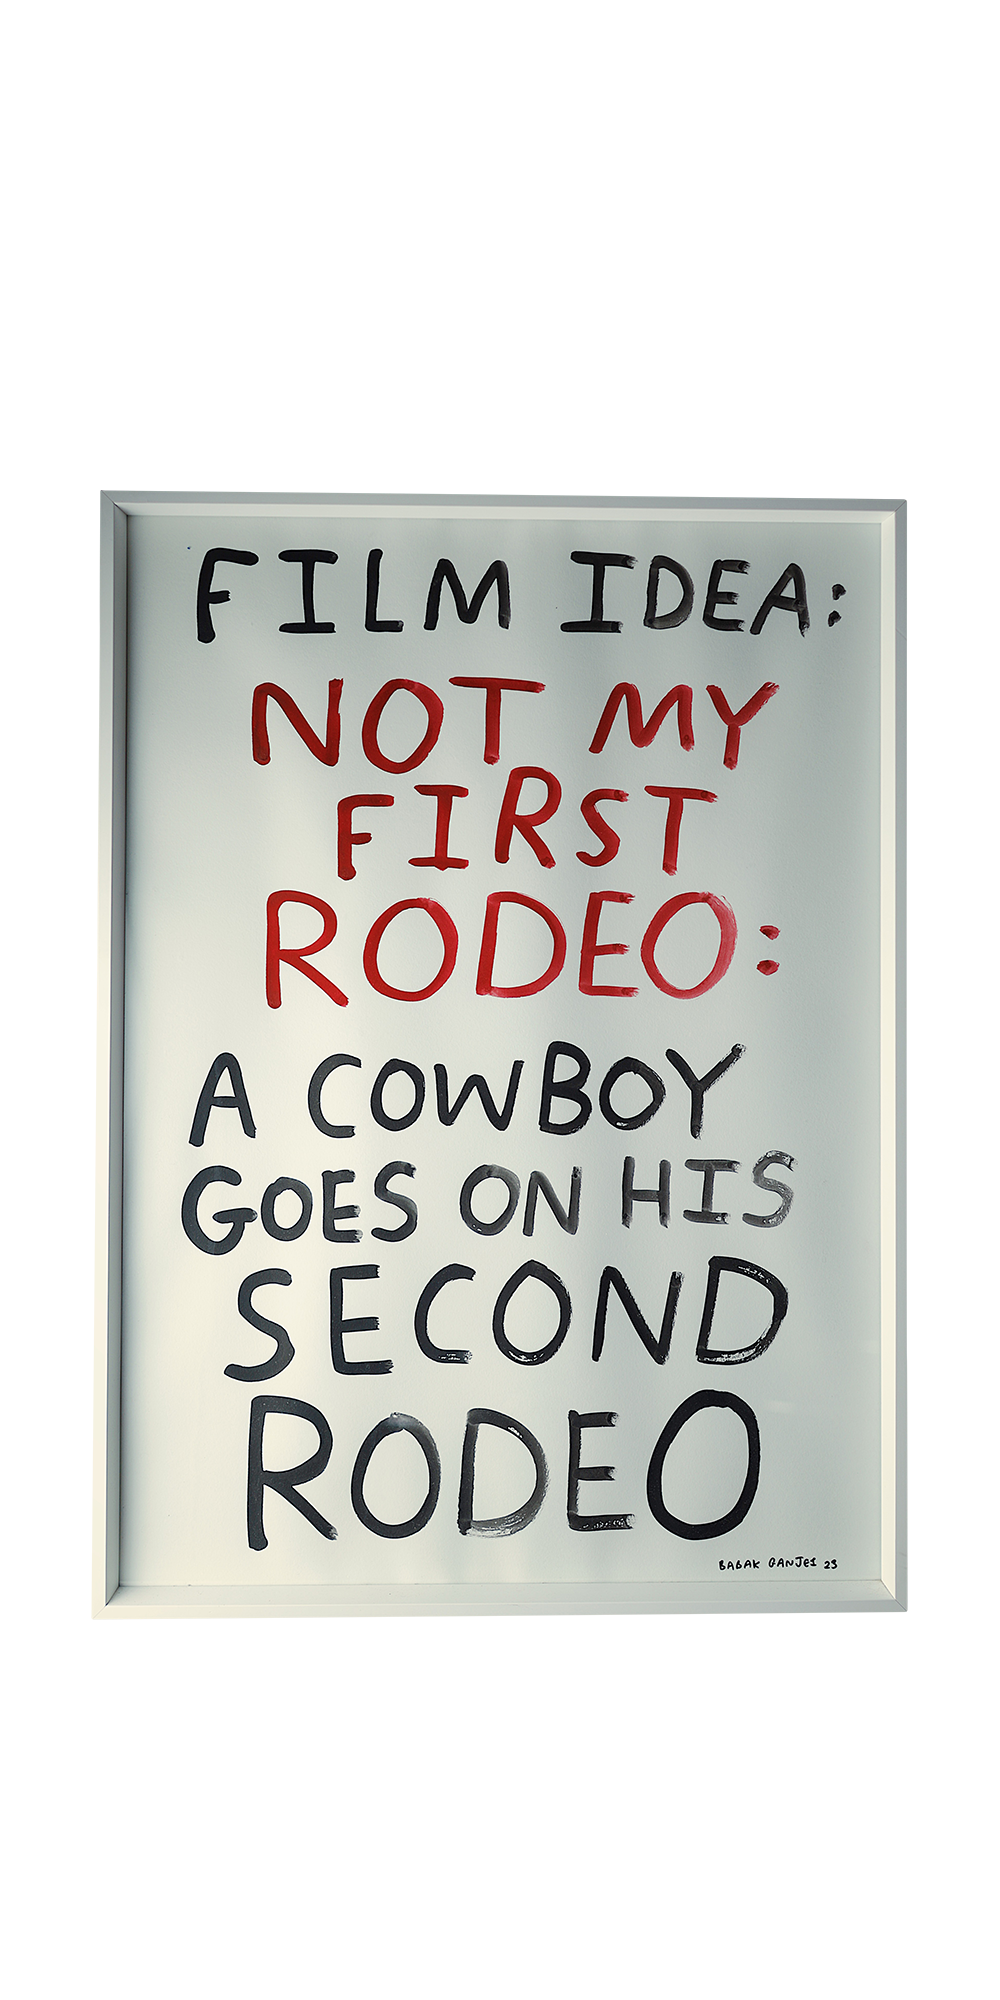 Film Idea: Not my first rodeo